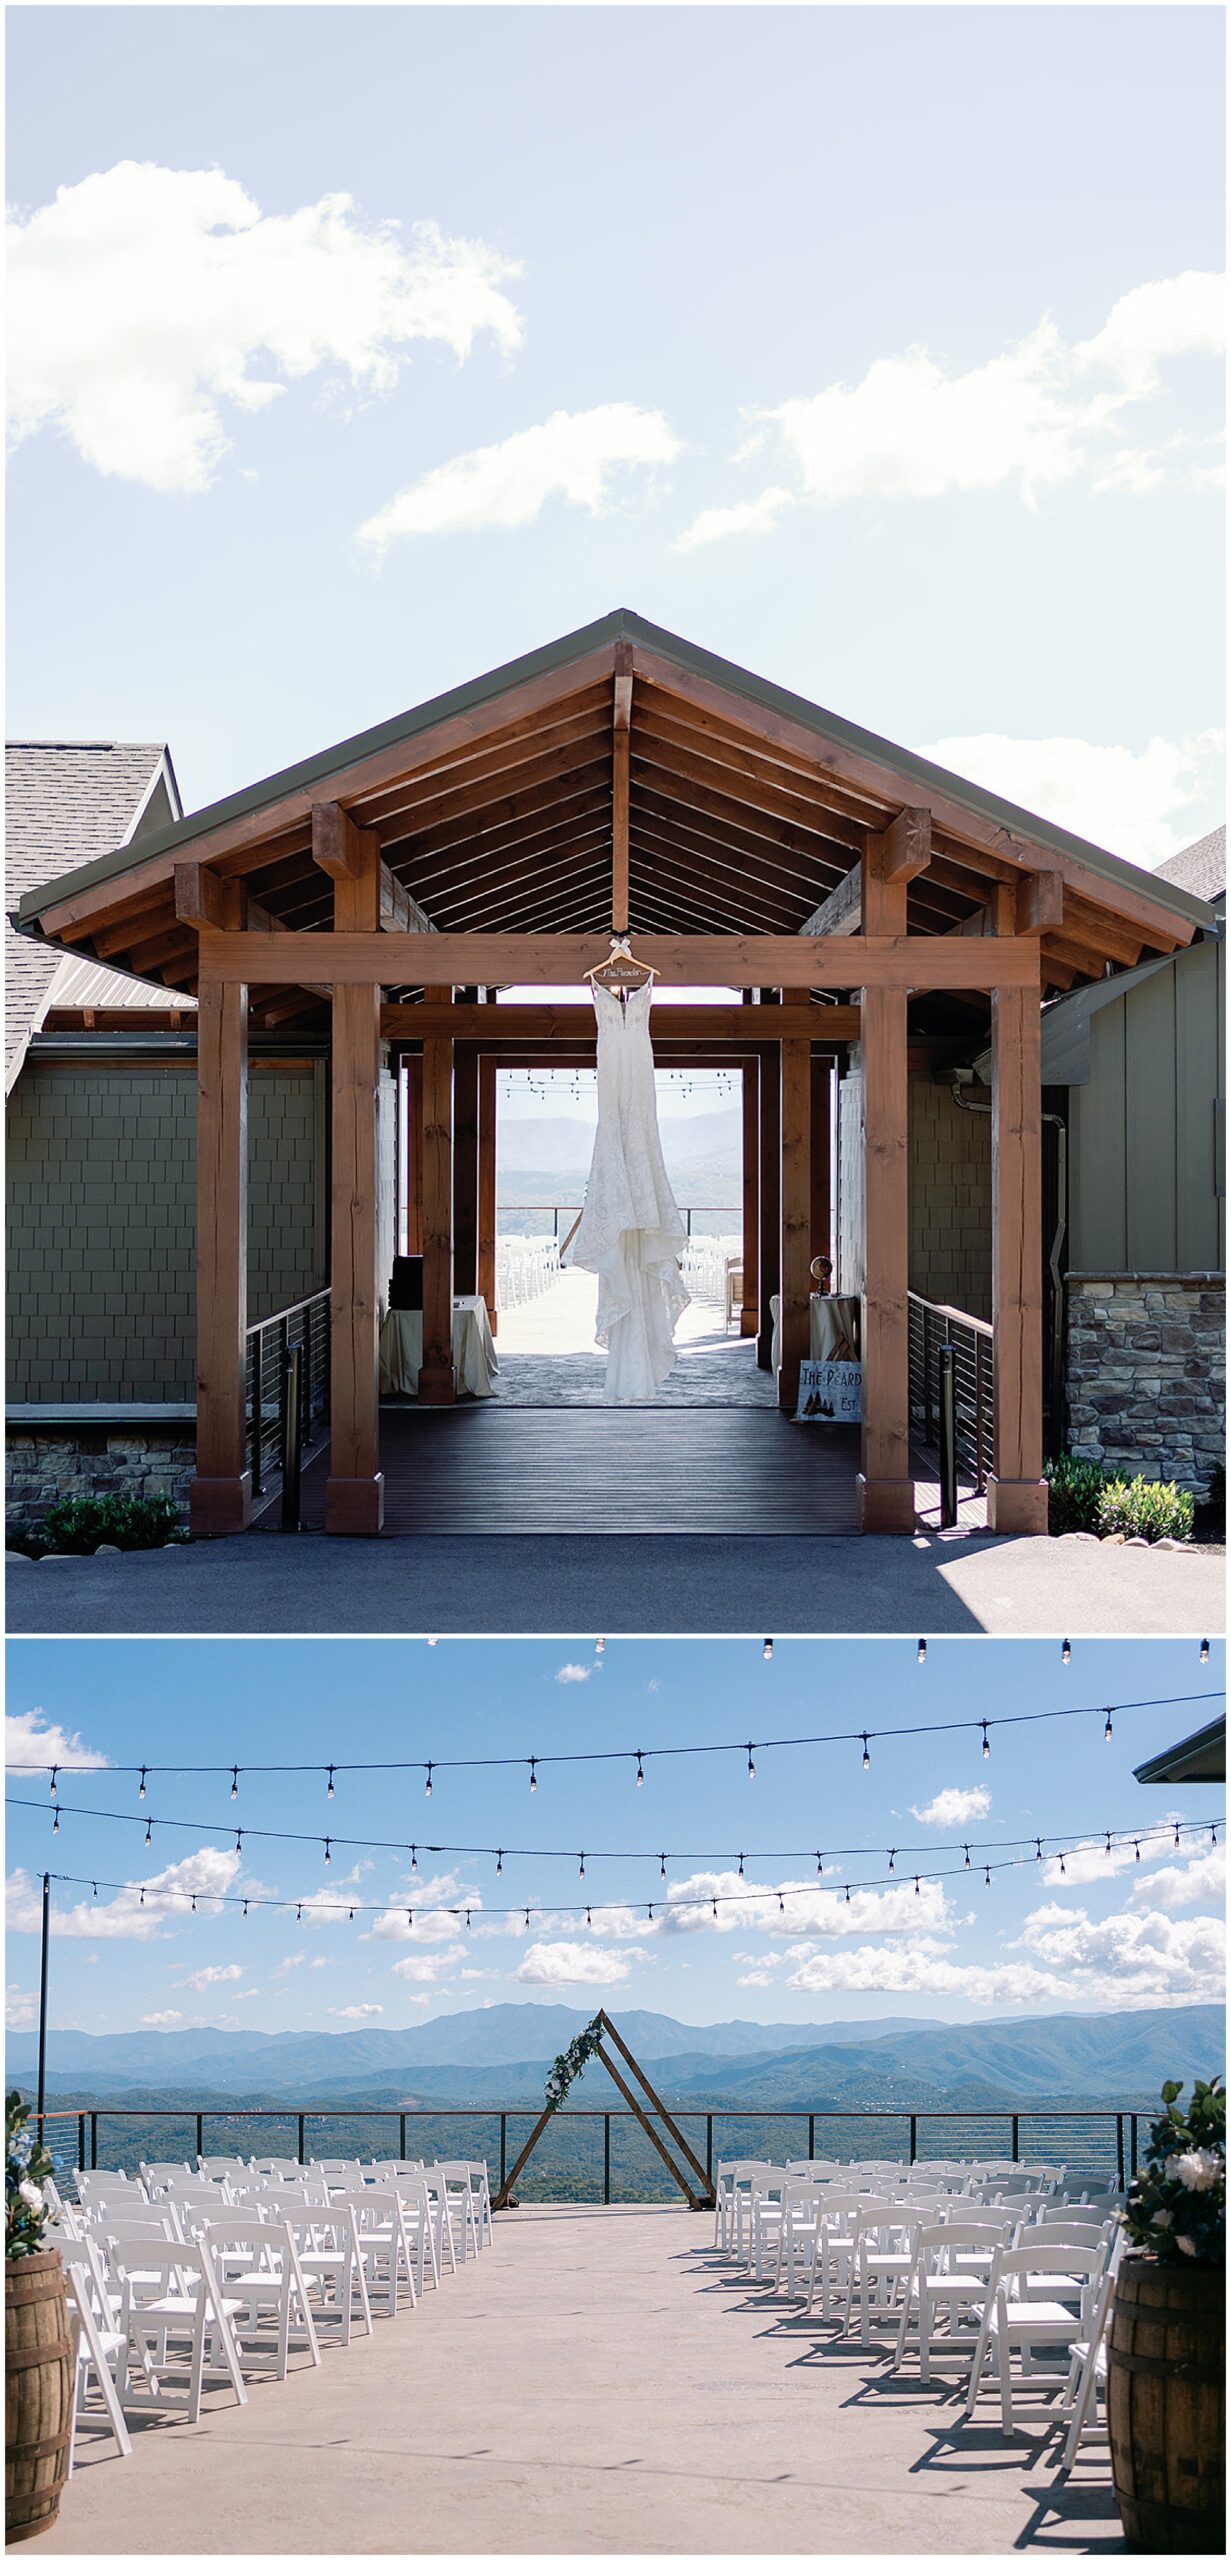 A long white lace wedding dress hangs from a roof beam over a walkway at the trillium venue